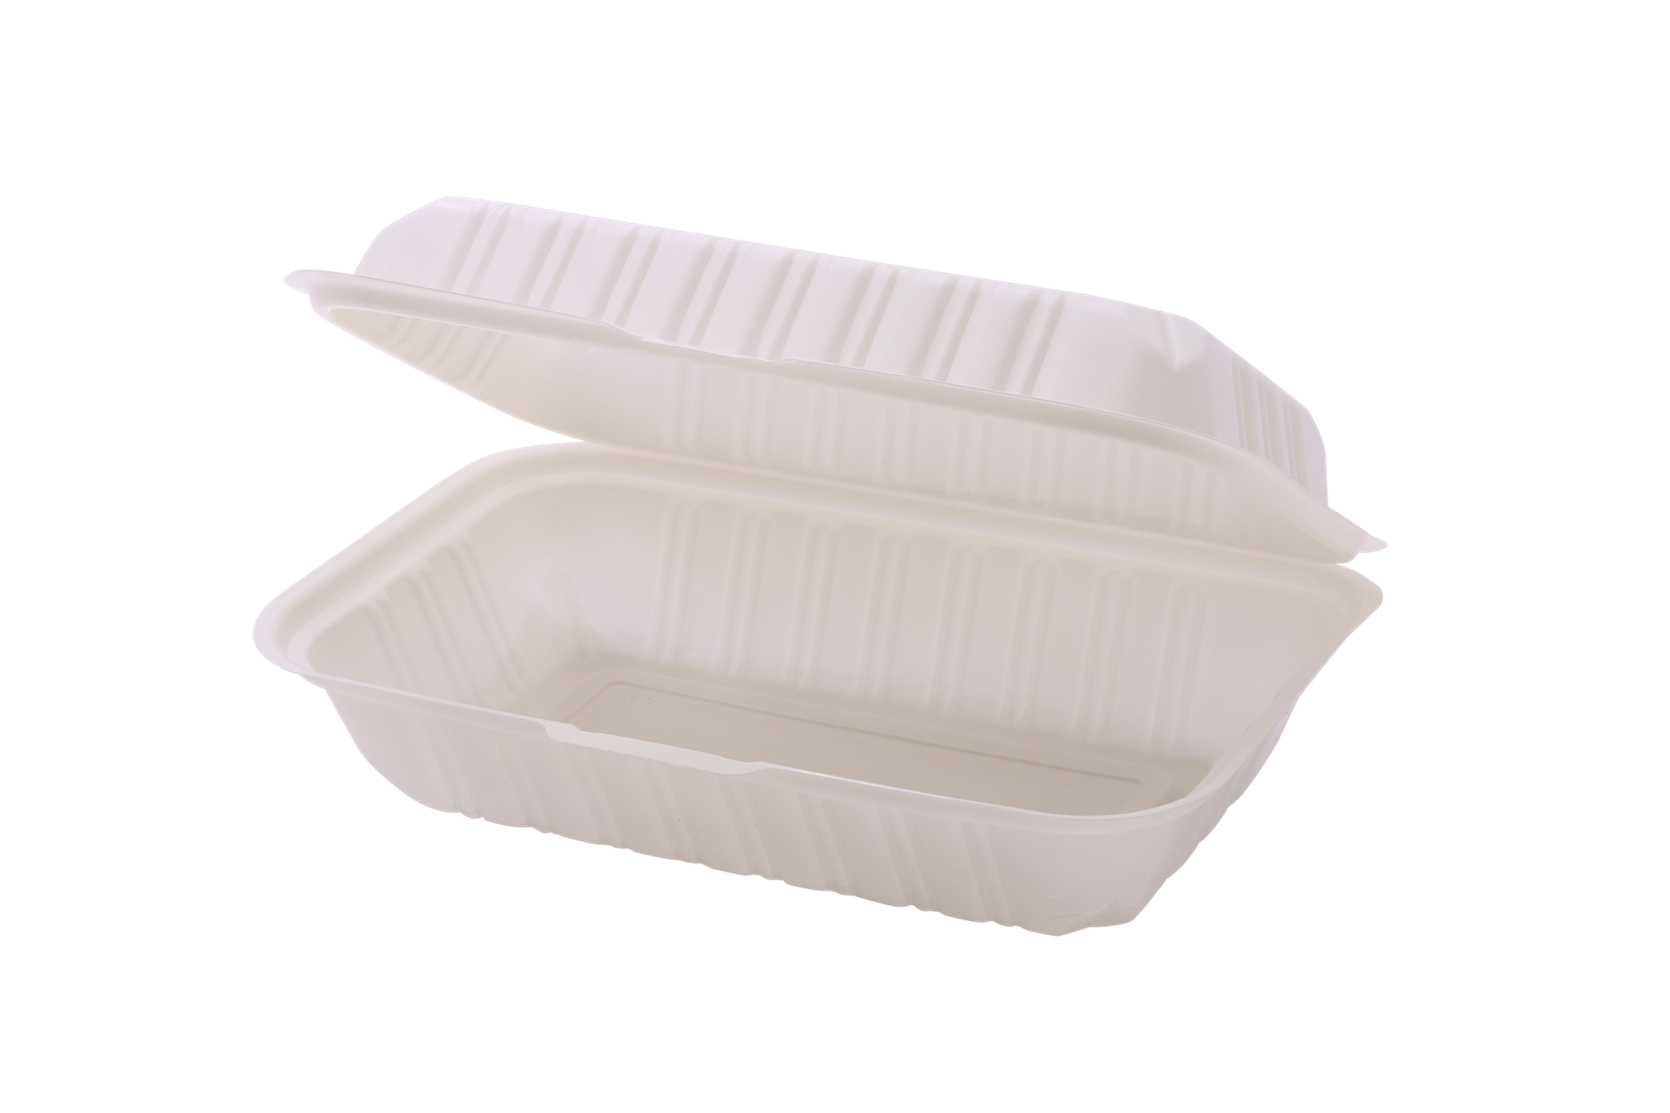 MFPP Plastic Take-Out Container 9" X 6" X 2.75" - 200/Case